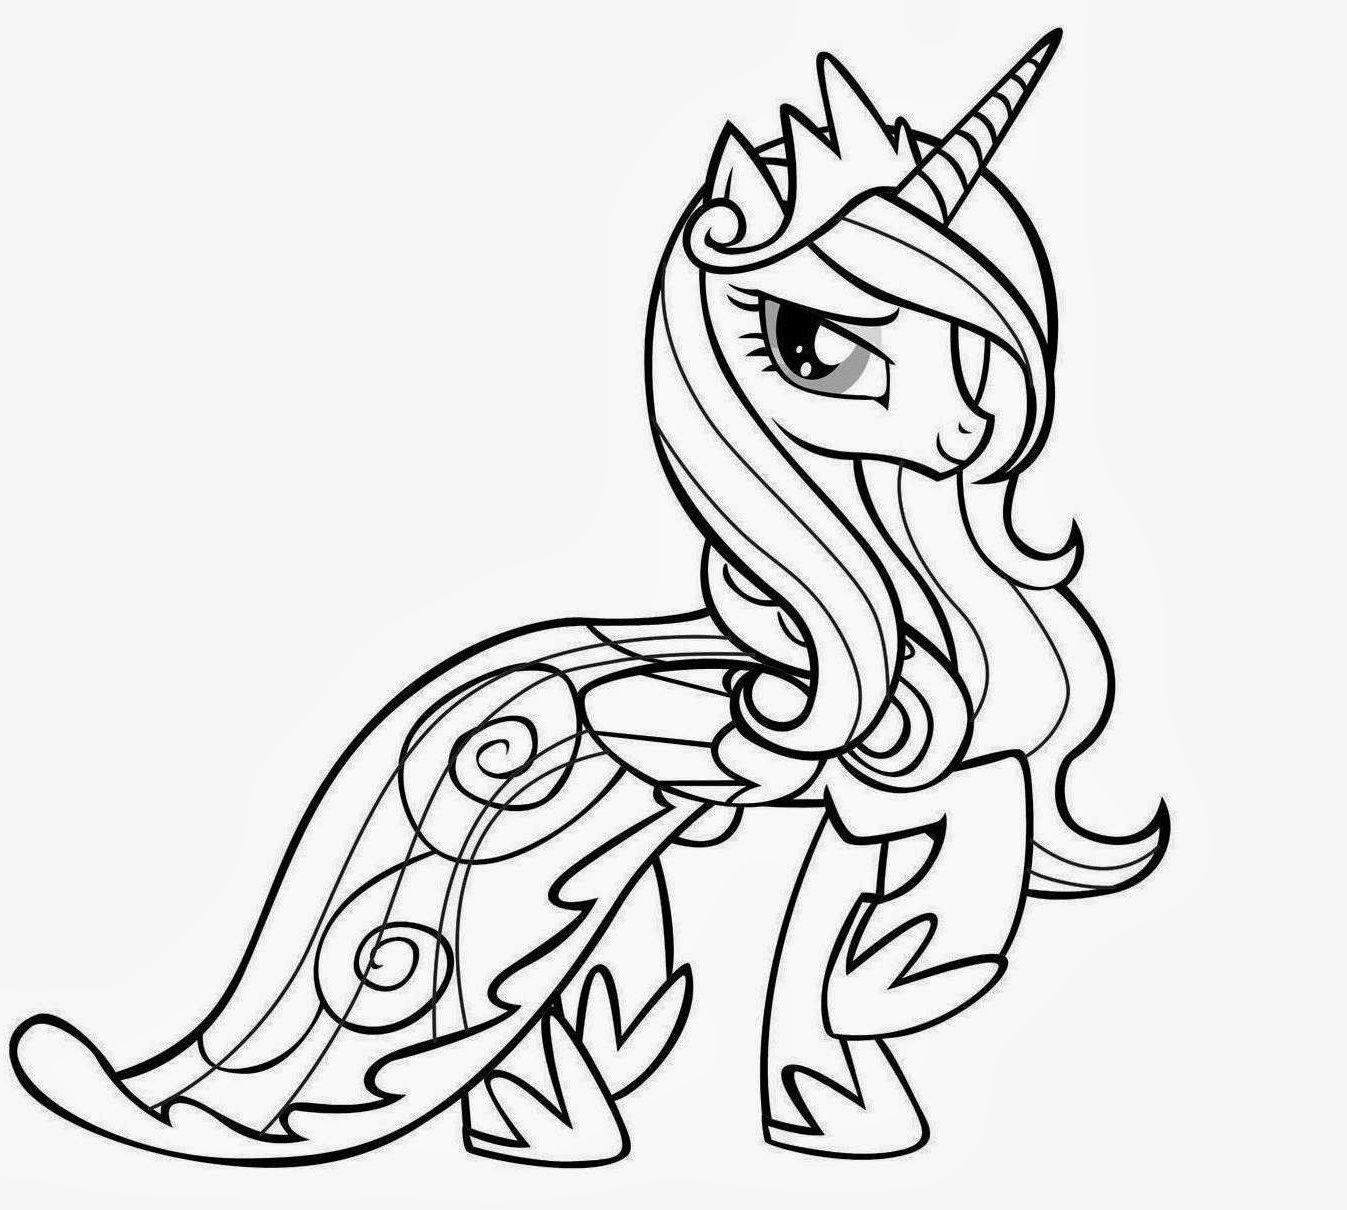 Princesse à Colorier Impressionnant Image My Little Pony Filly Coloring Pages All to Her Coloring